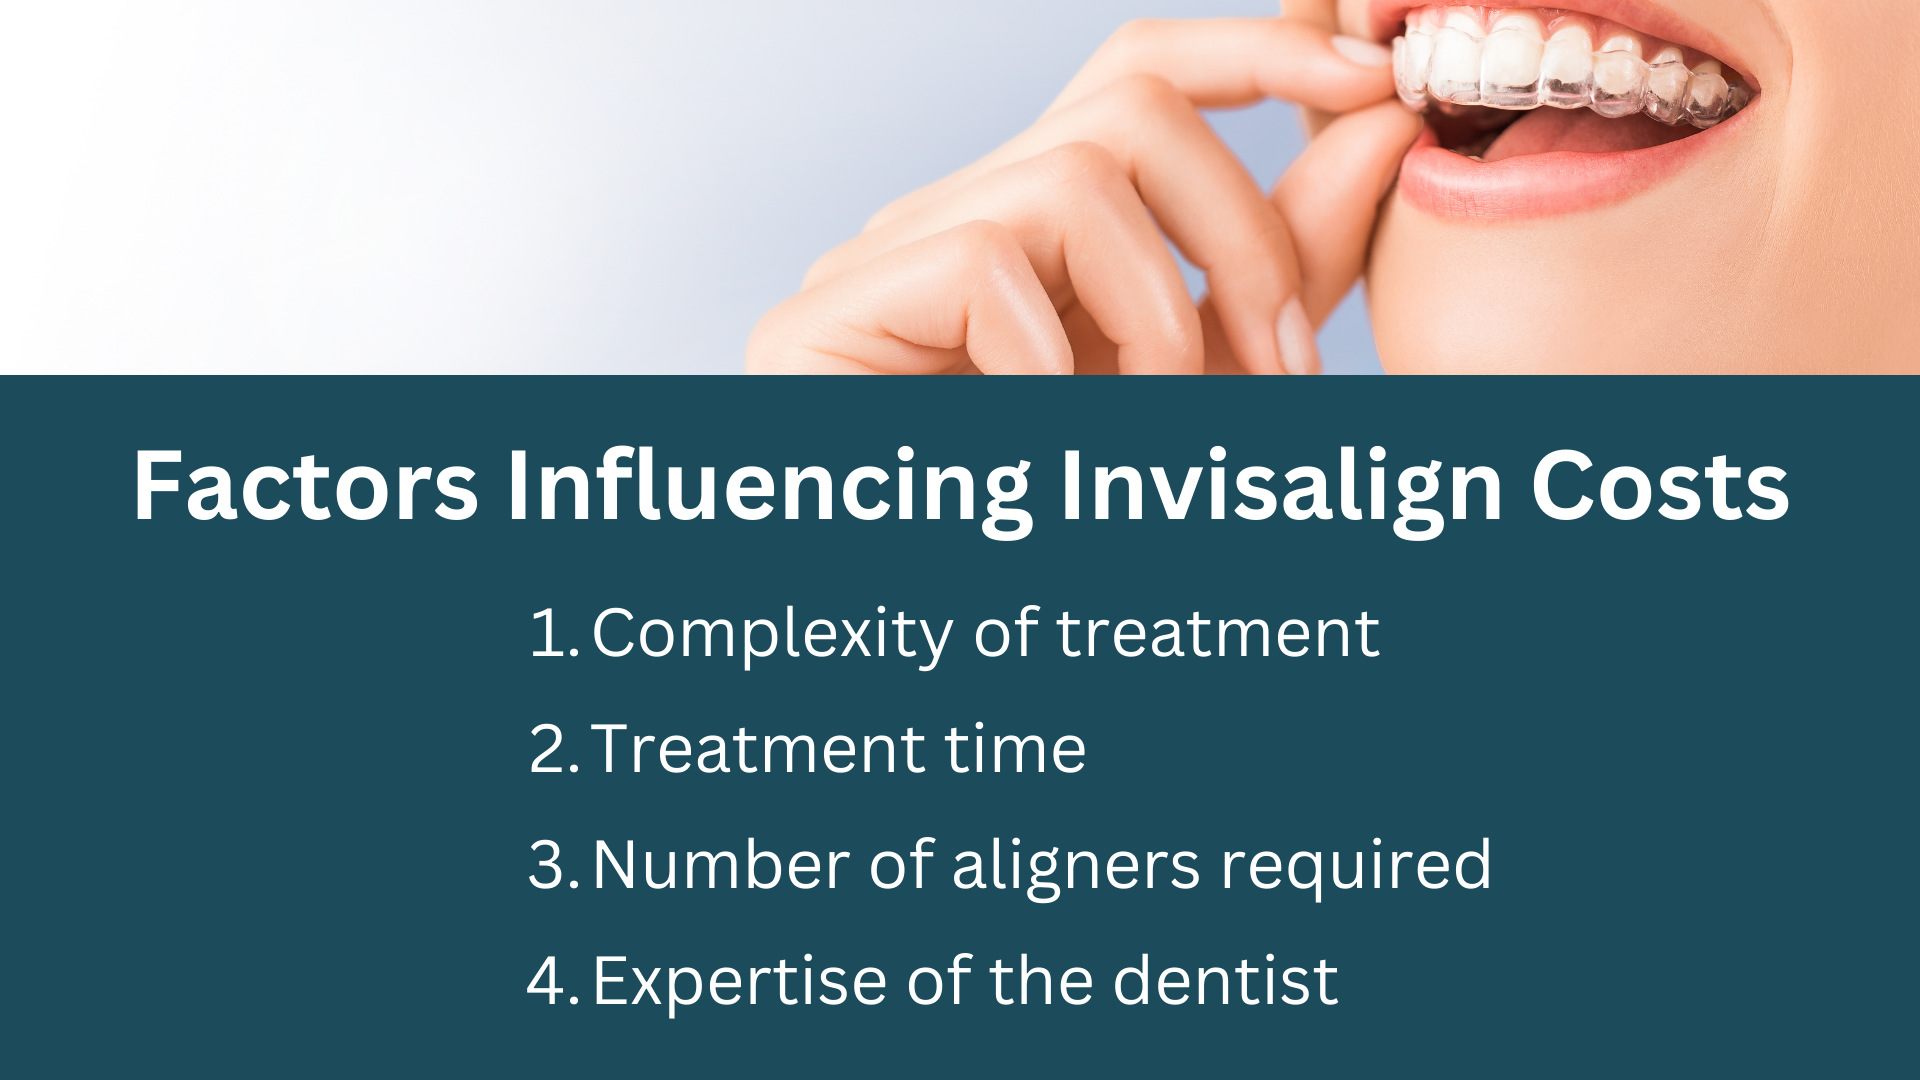 what factors impact the cost of invisalign? 